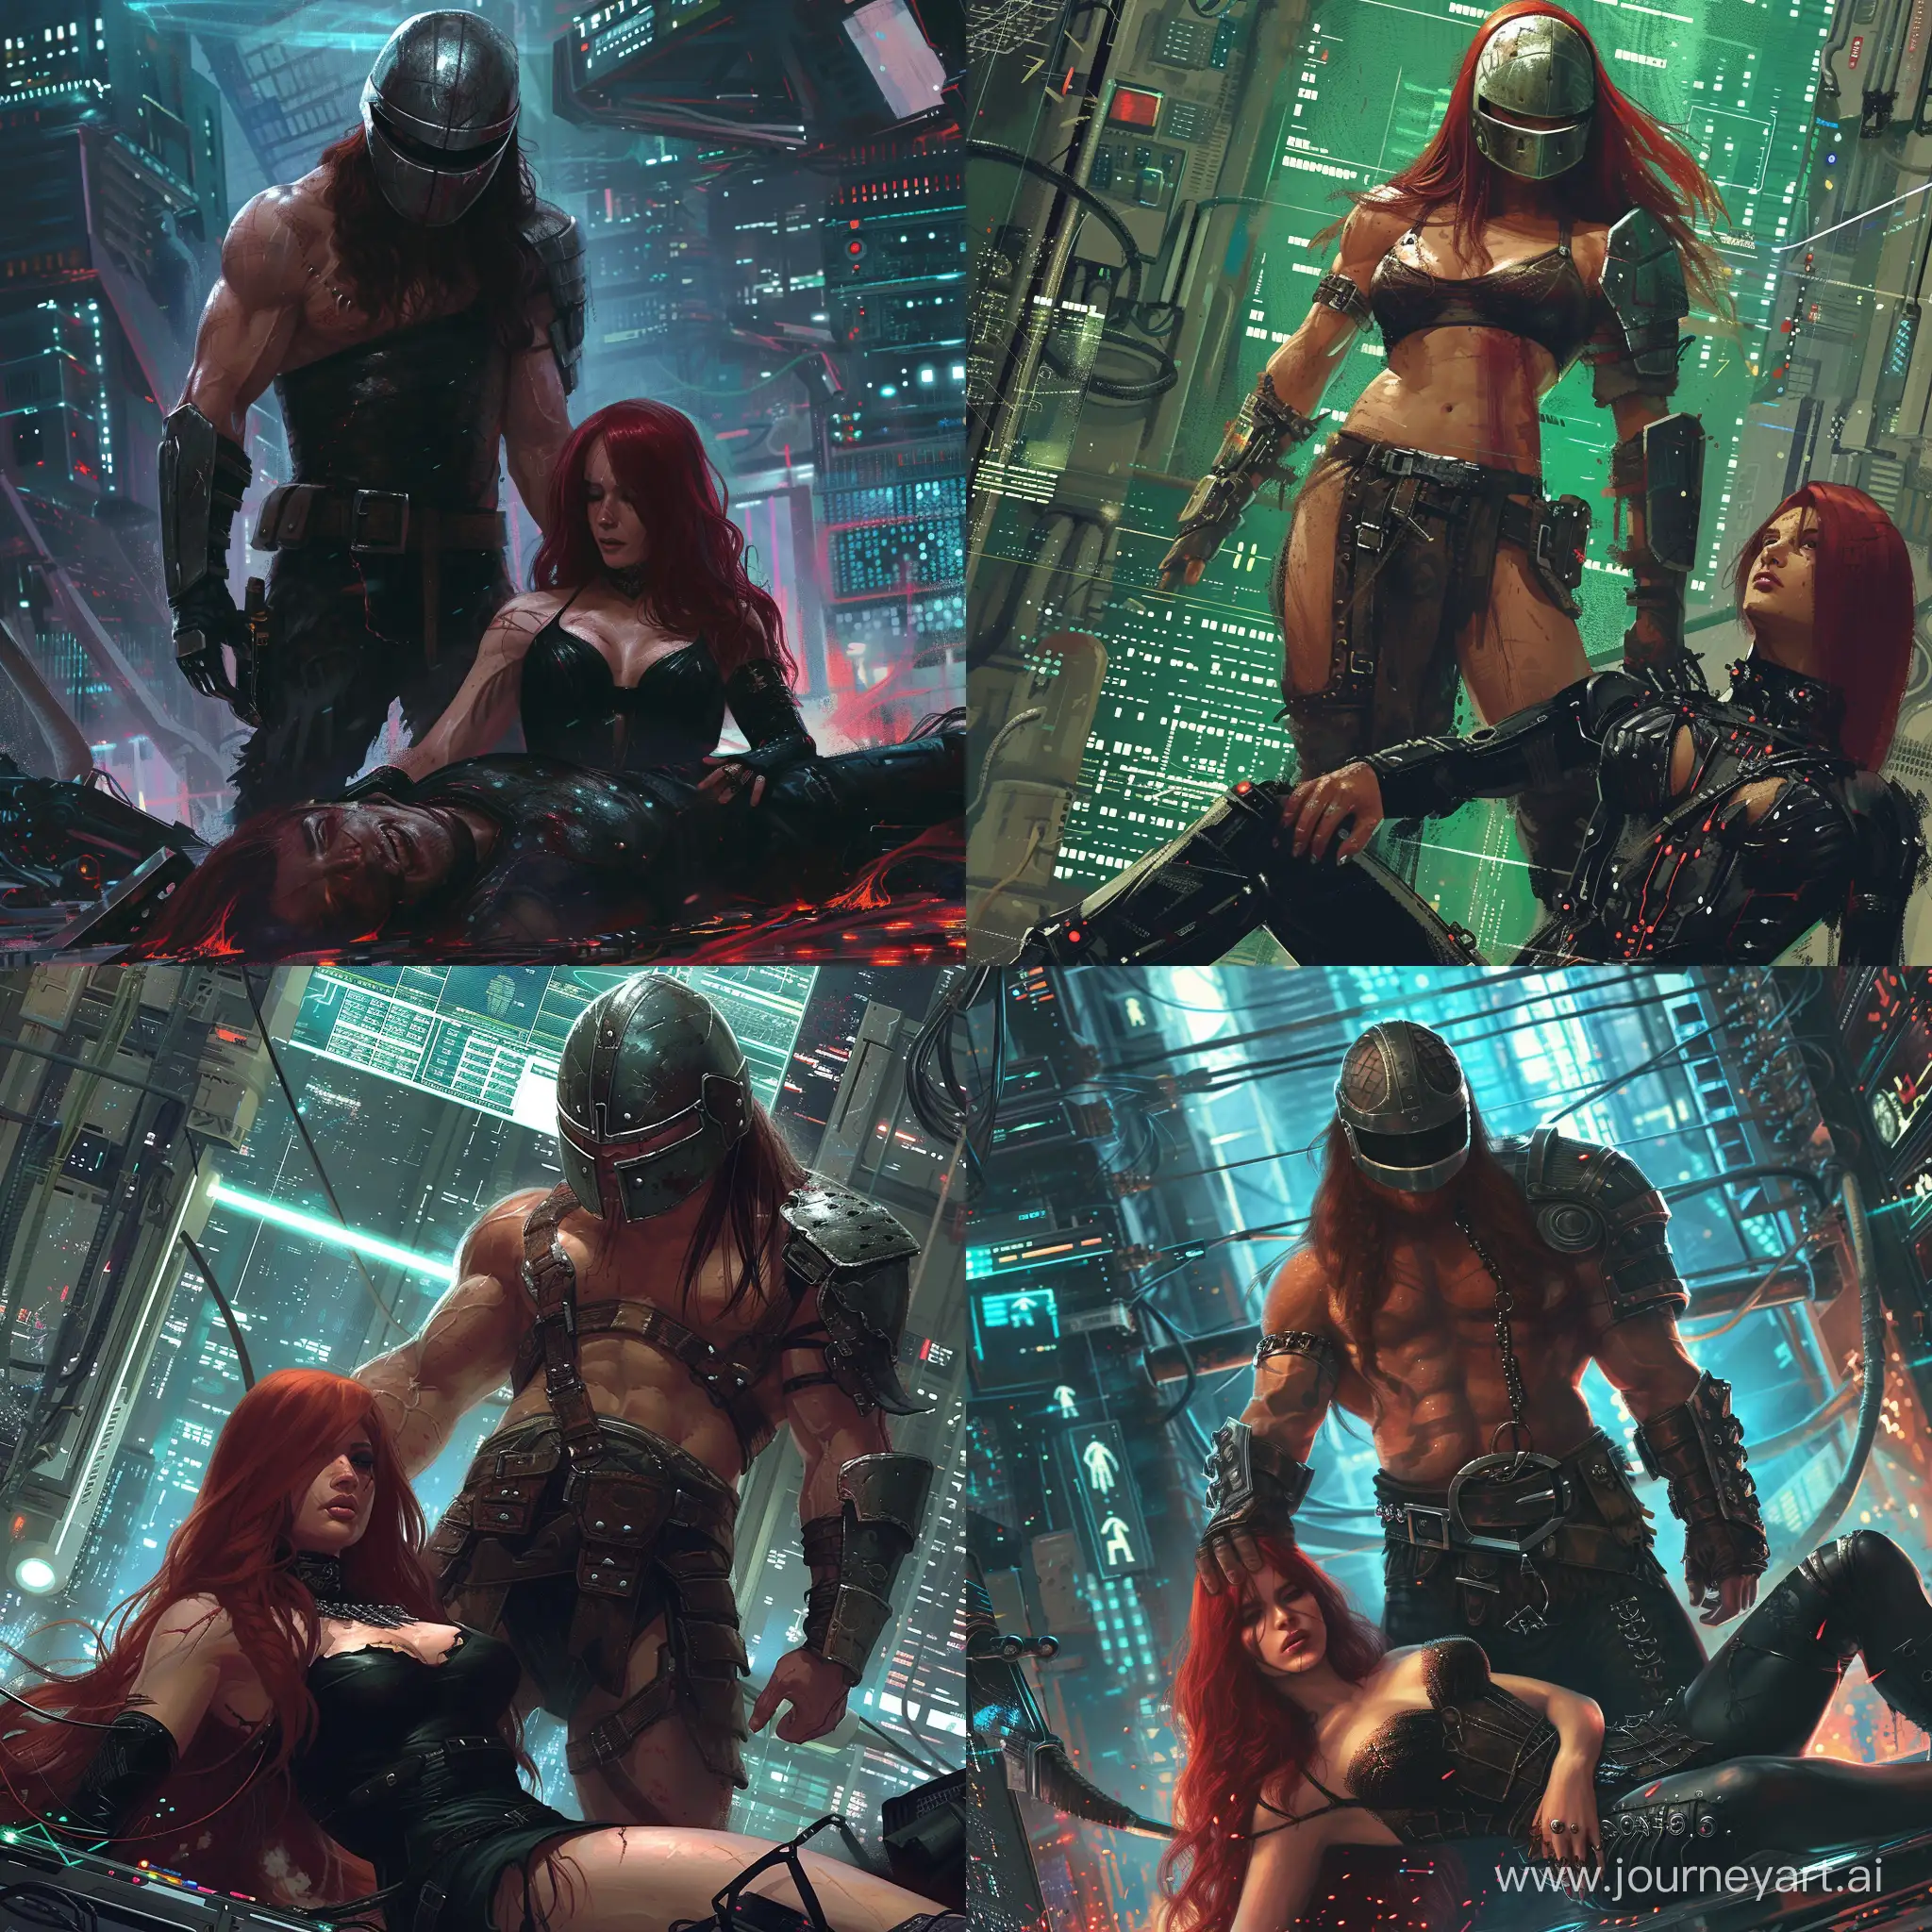 Mysterious-Chinese-Warrior-Dominates-Cyberpunk-Scene-with-Gothic-Femme-Fatale